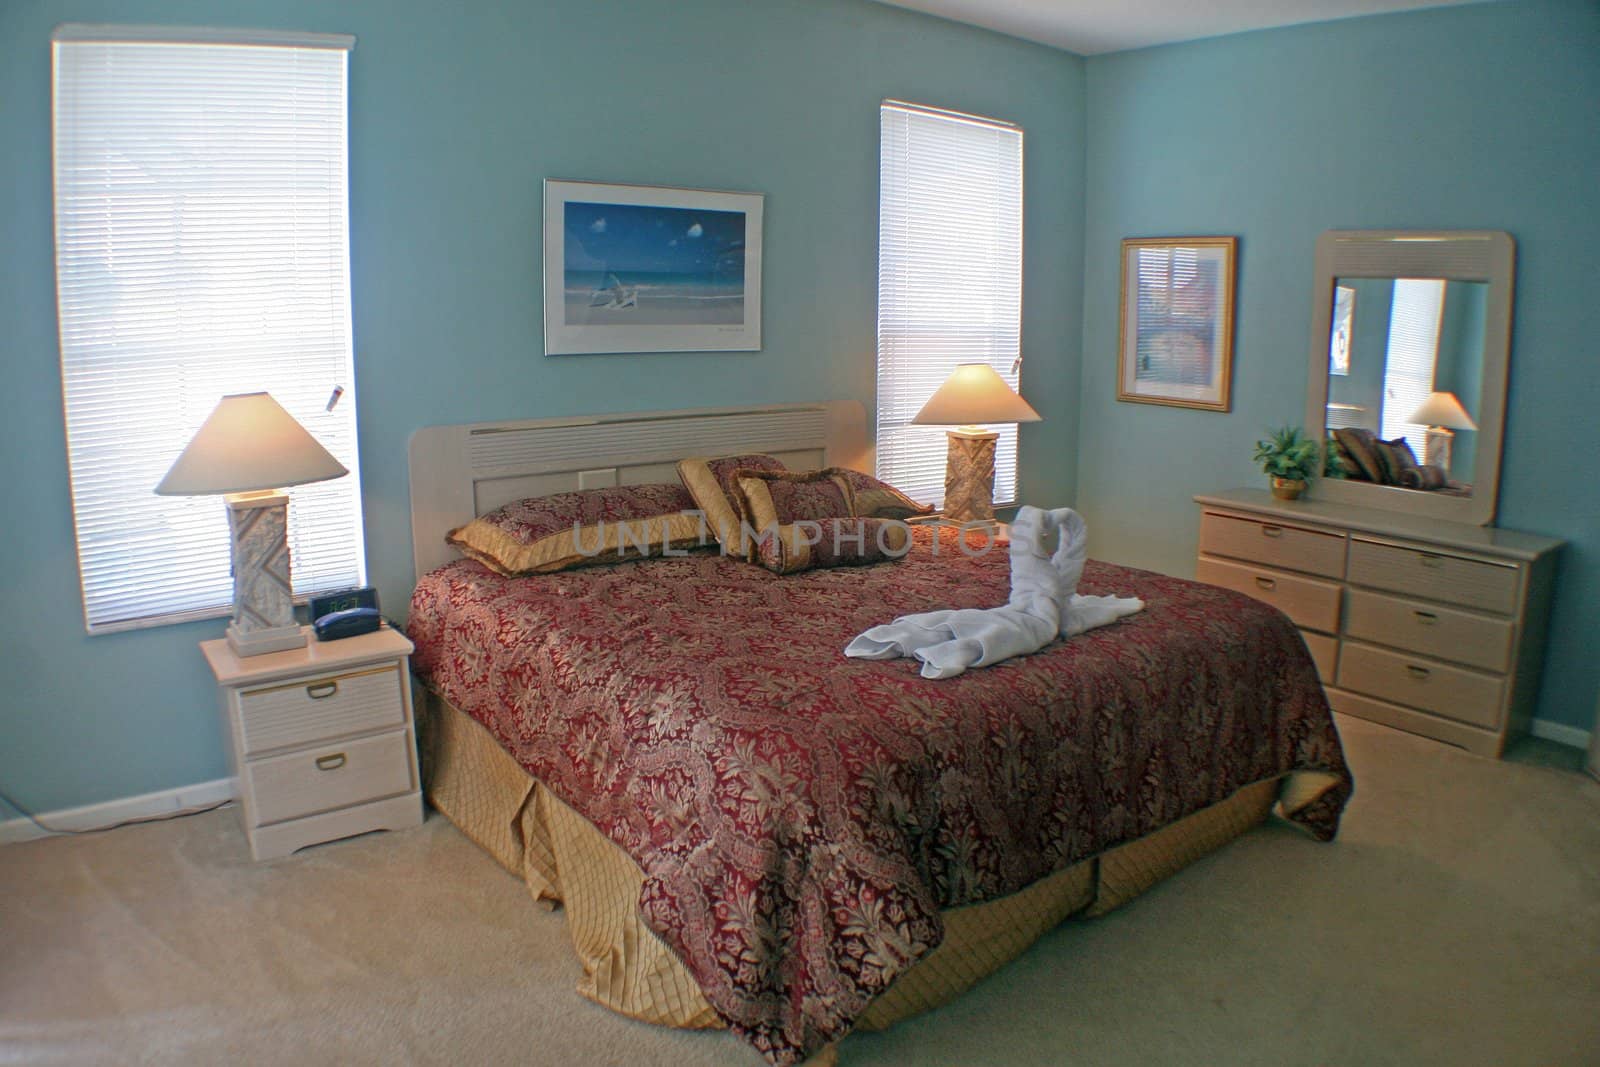 A Large Master Bedroom, interior shot of a home.